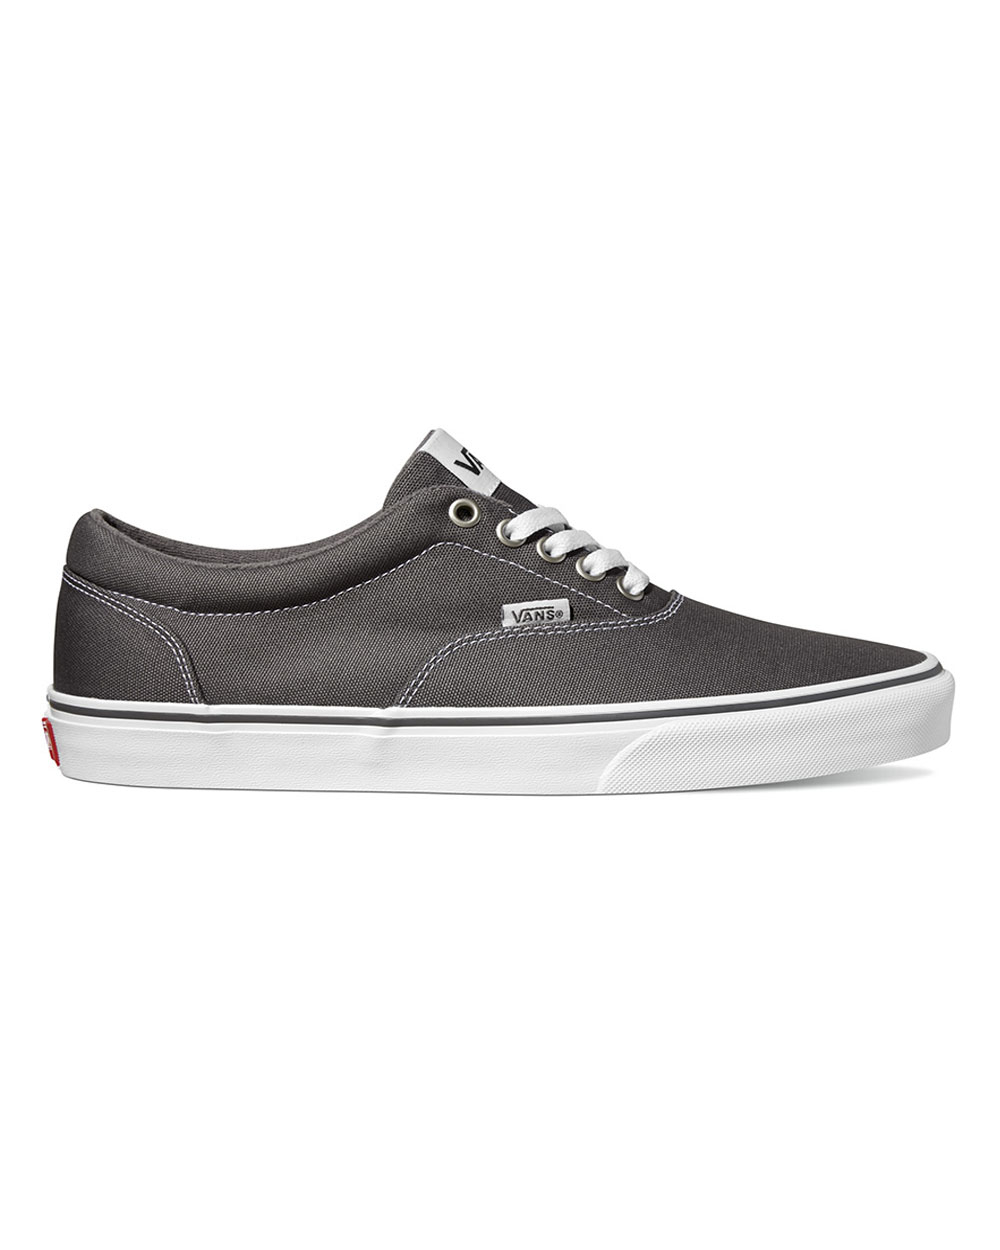 Vans Doheny Canvas (pewter/white)